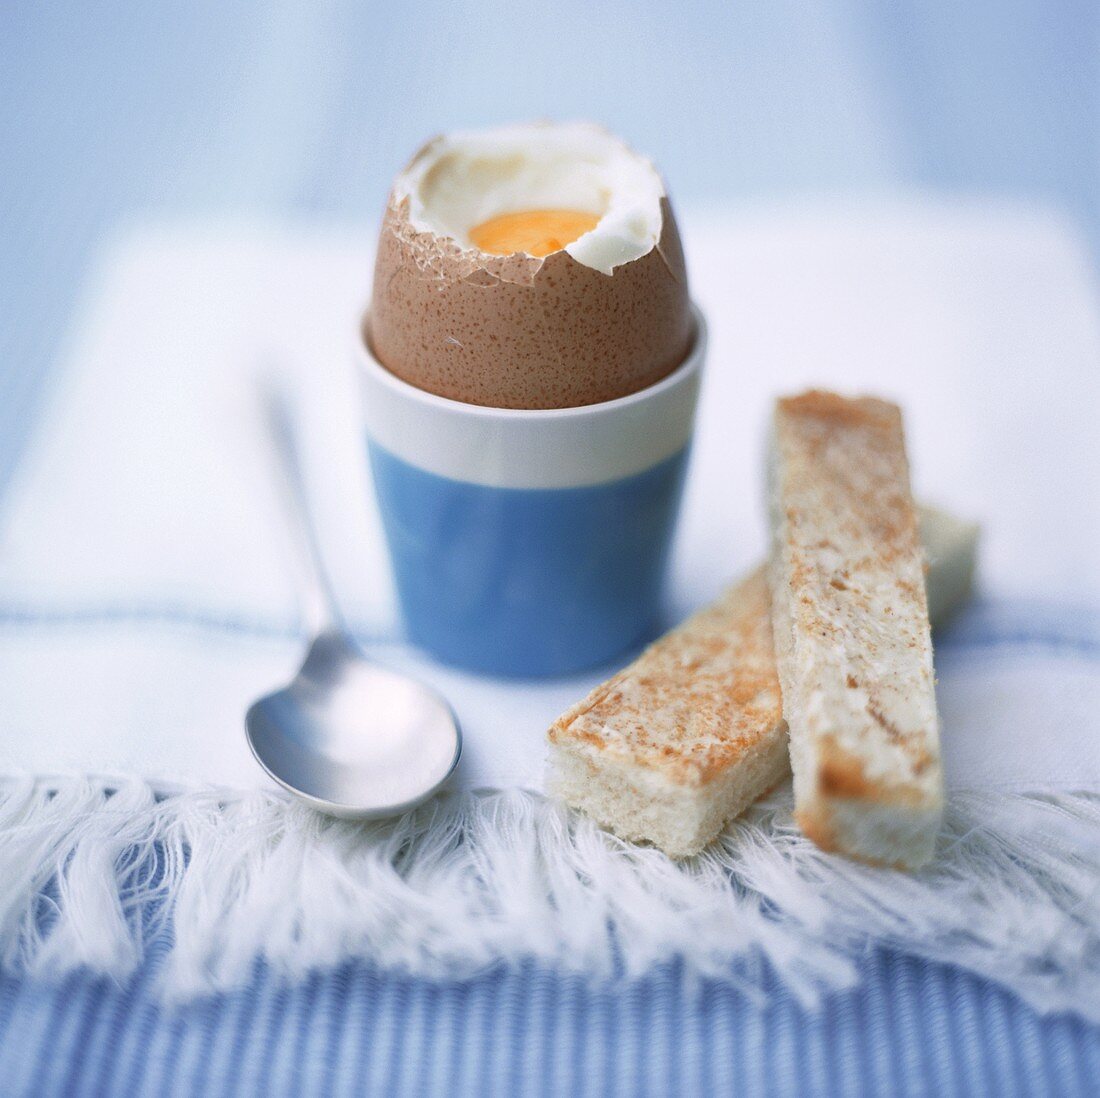 Soft egg in eggcup; toast